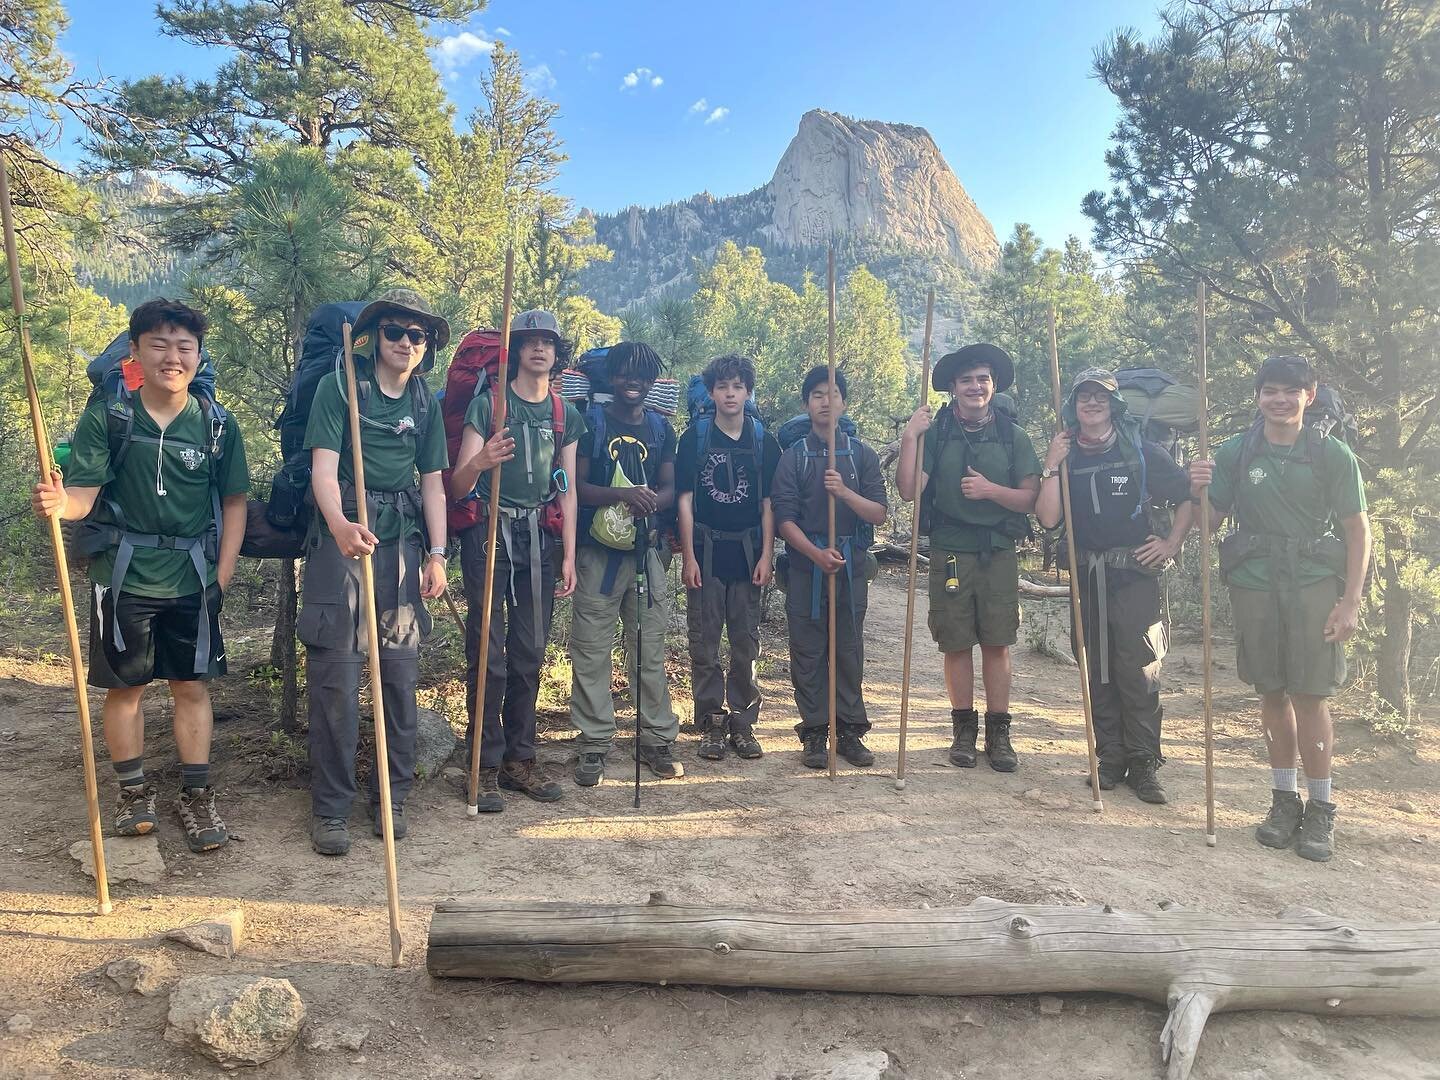 Troop 1 Altadena Philmont crew 710-7E about to climb the Tooth of Time. #philmontscoutranch #troop1altadena #toothoftime #stockaderidgecamp